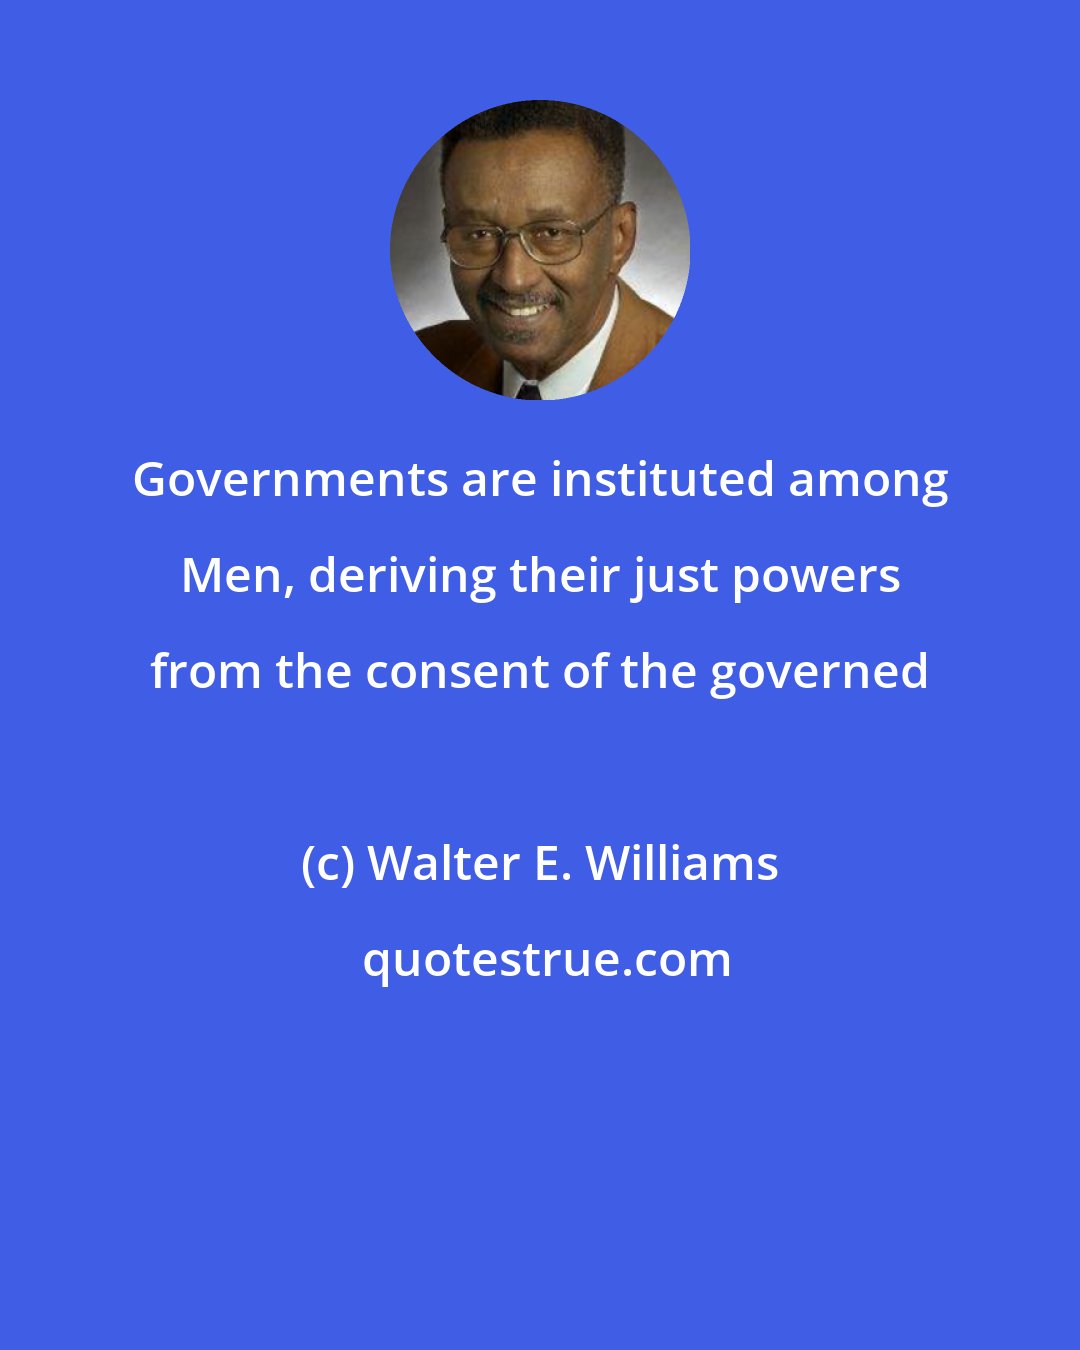 Walter E. Williams: Governments are instituted among Men, deriving their just powers from the consent of the governed